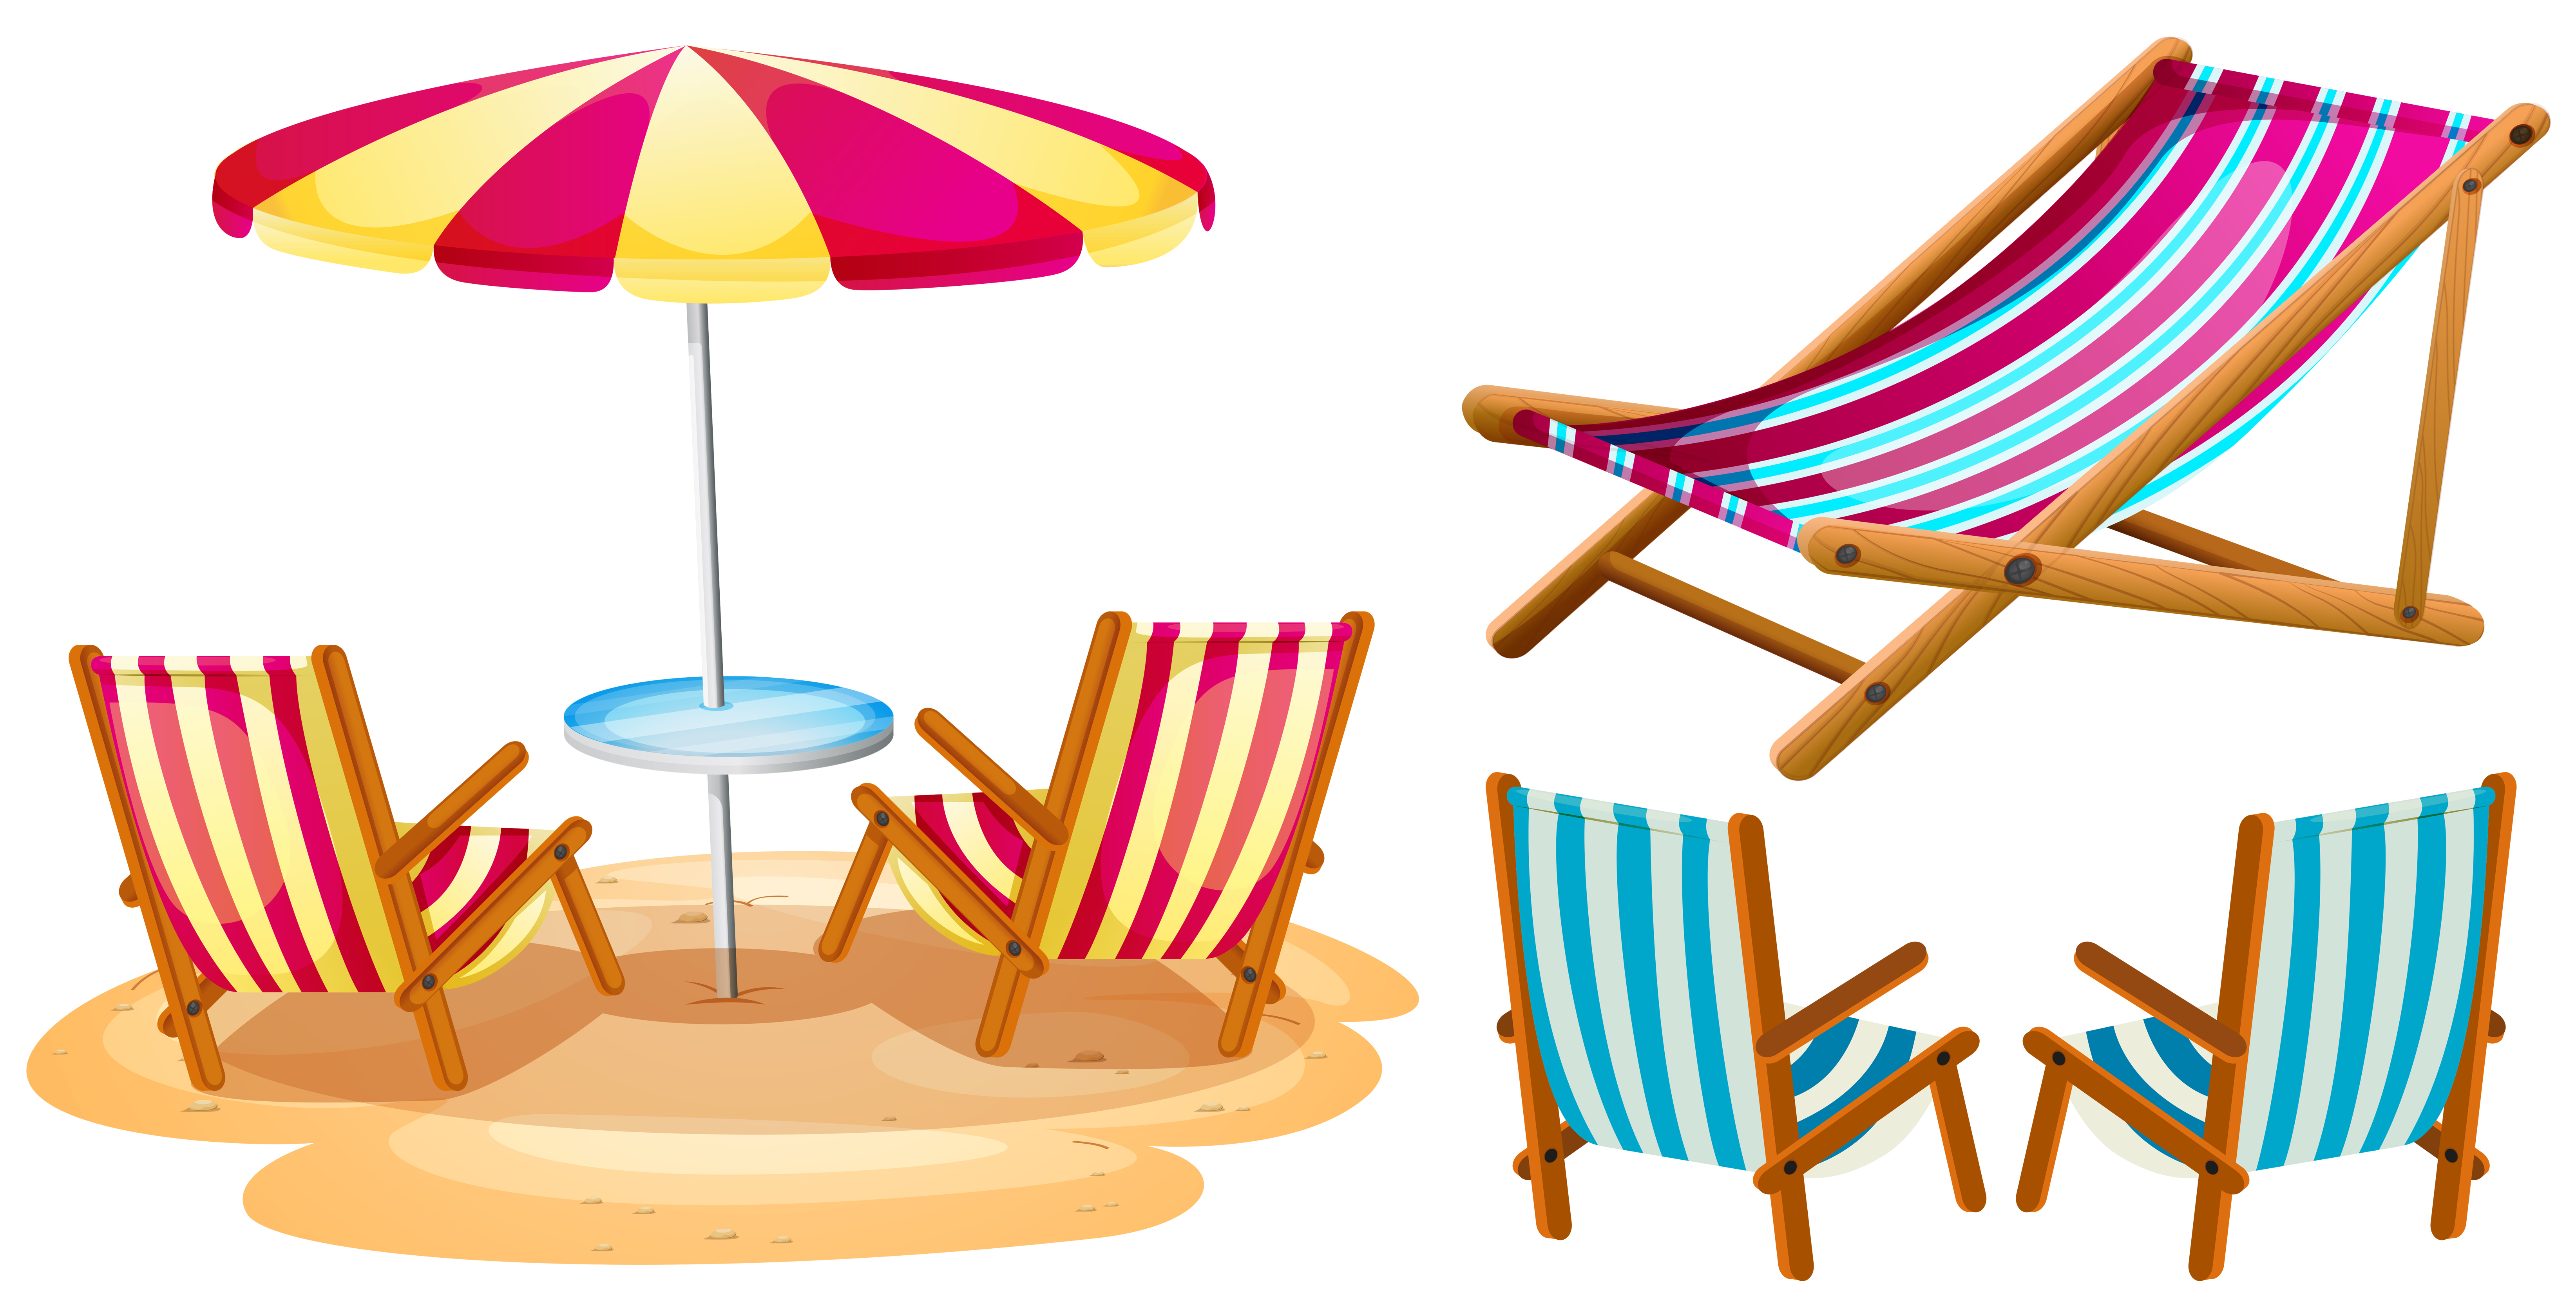  Beach Chair And Umbrella Clipart for Small Space